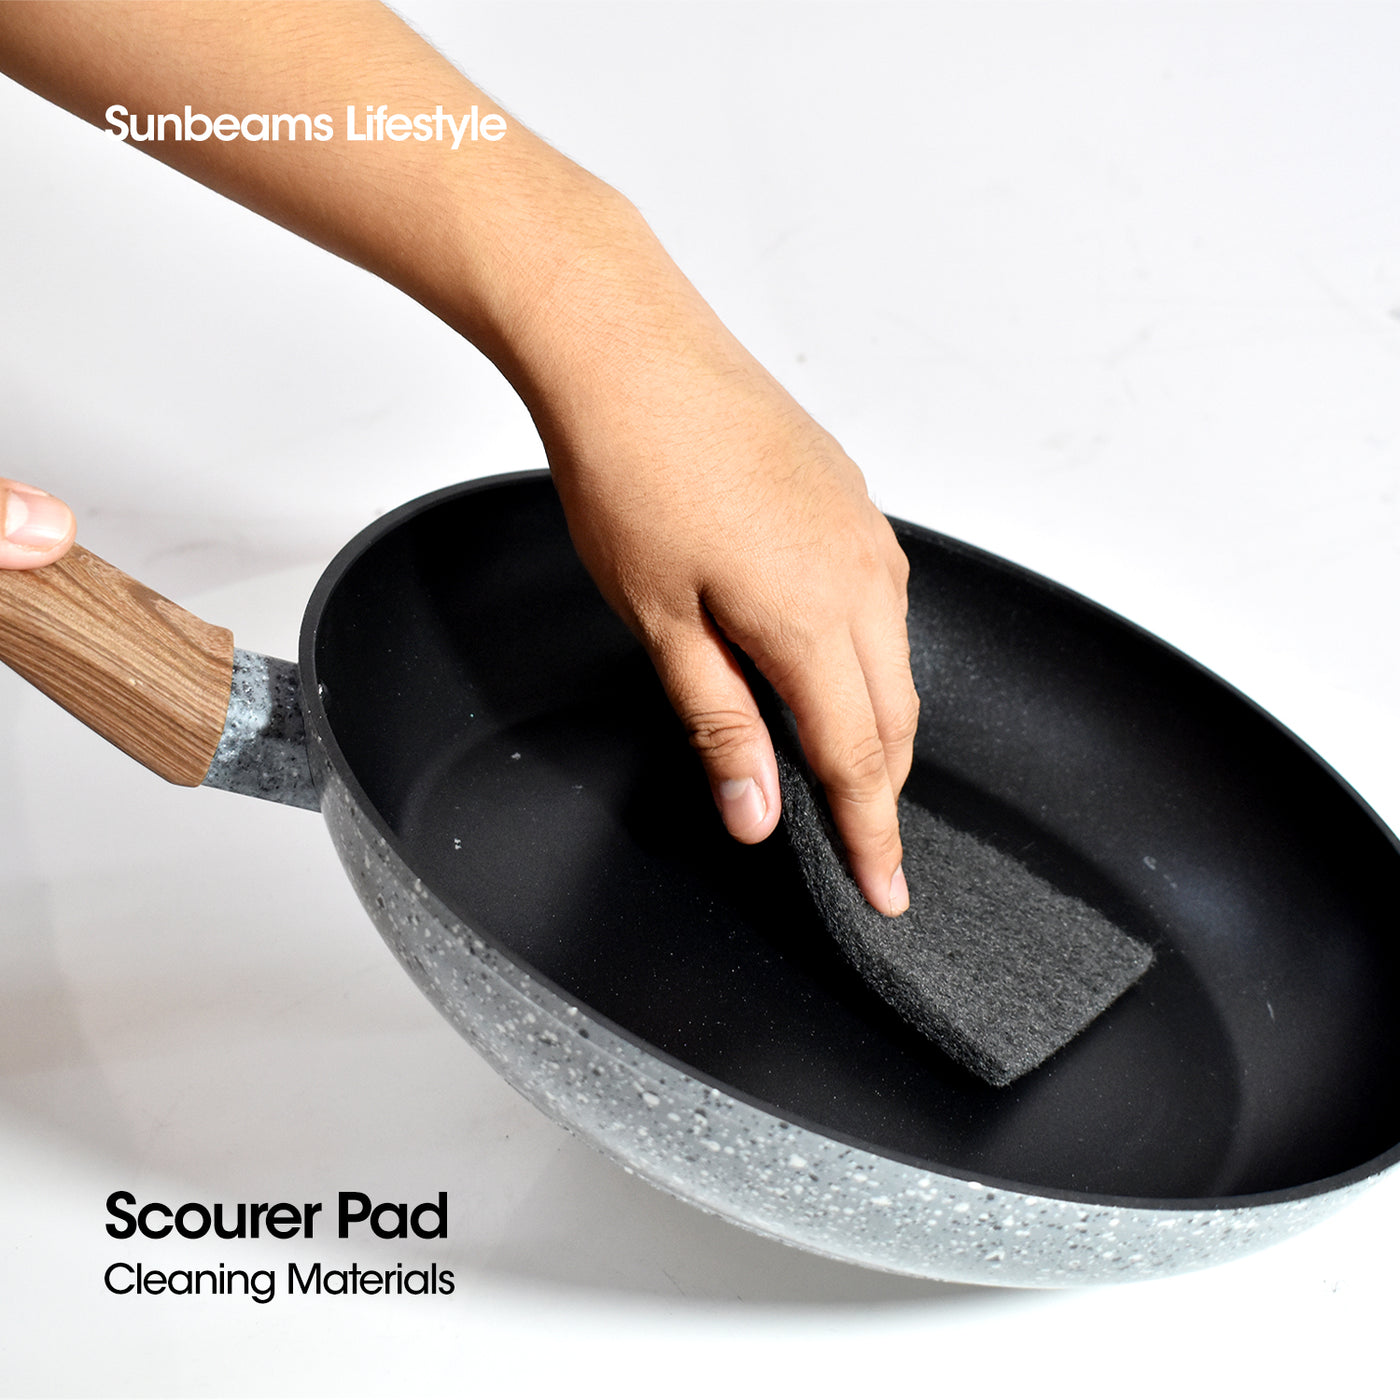 SCRUBZ Premium Scourer Pads Set of 12 Cleaning Material 14.9 x 9 x 2 cm Made of Polyester